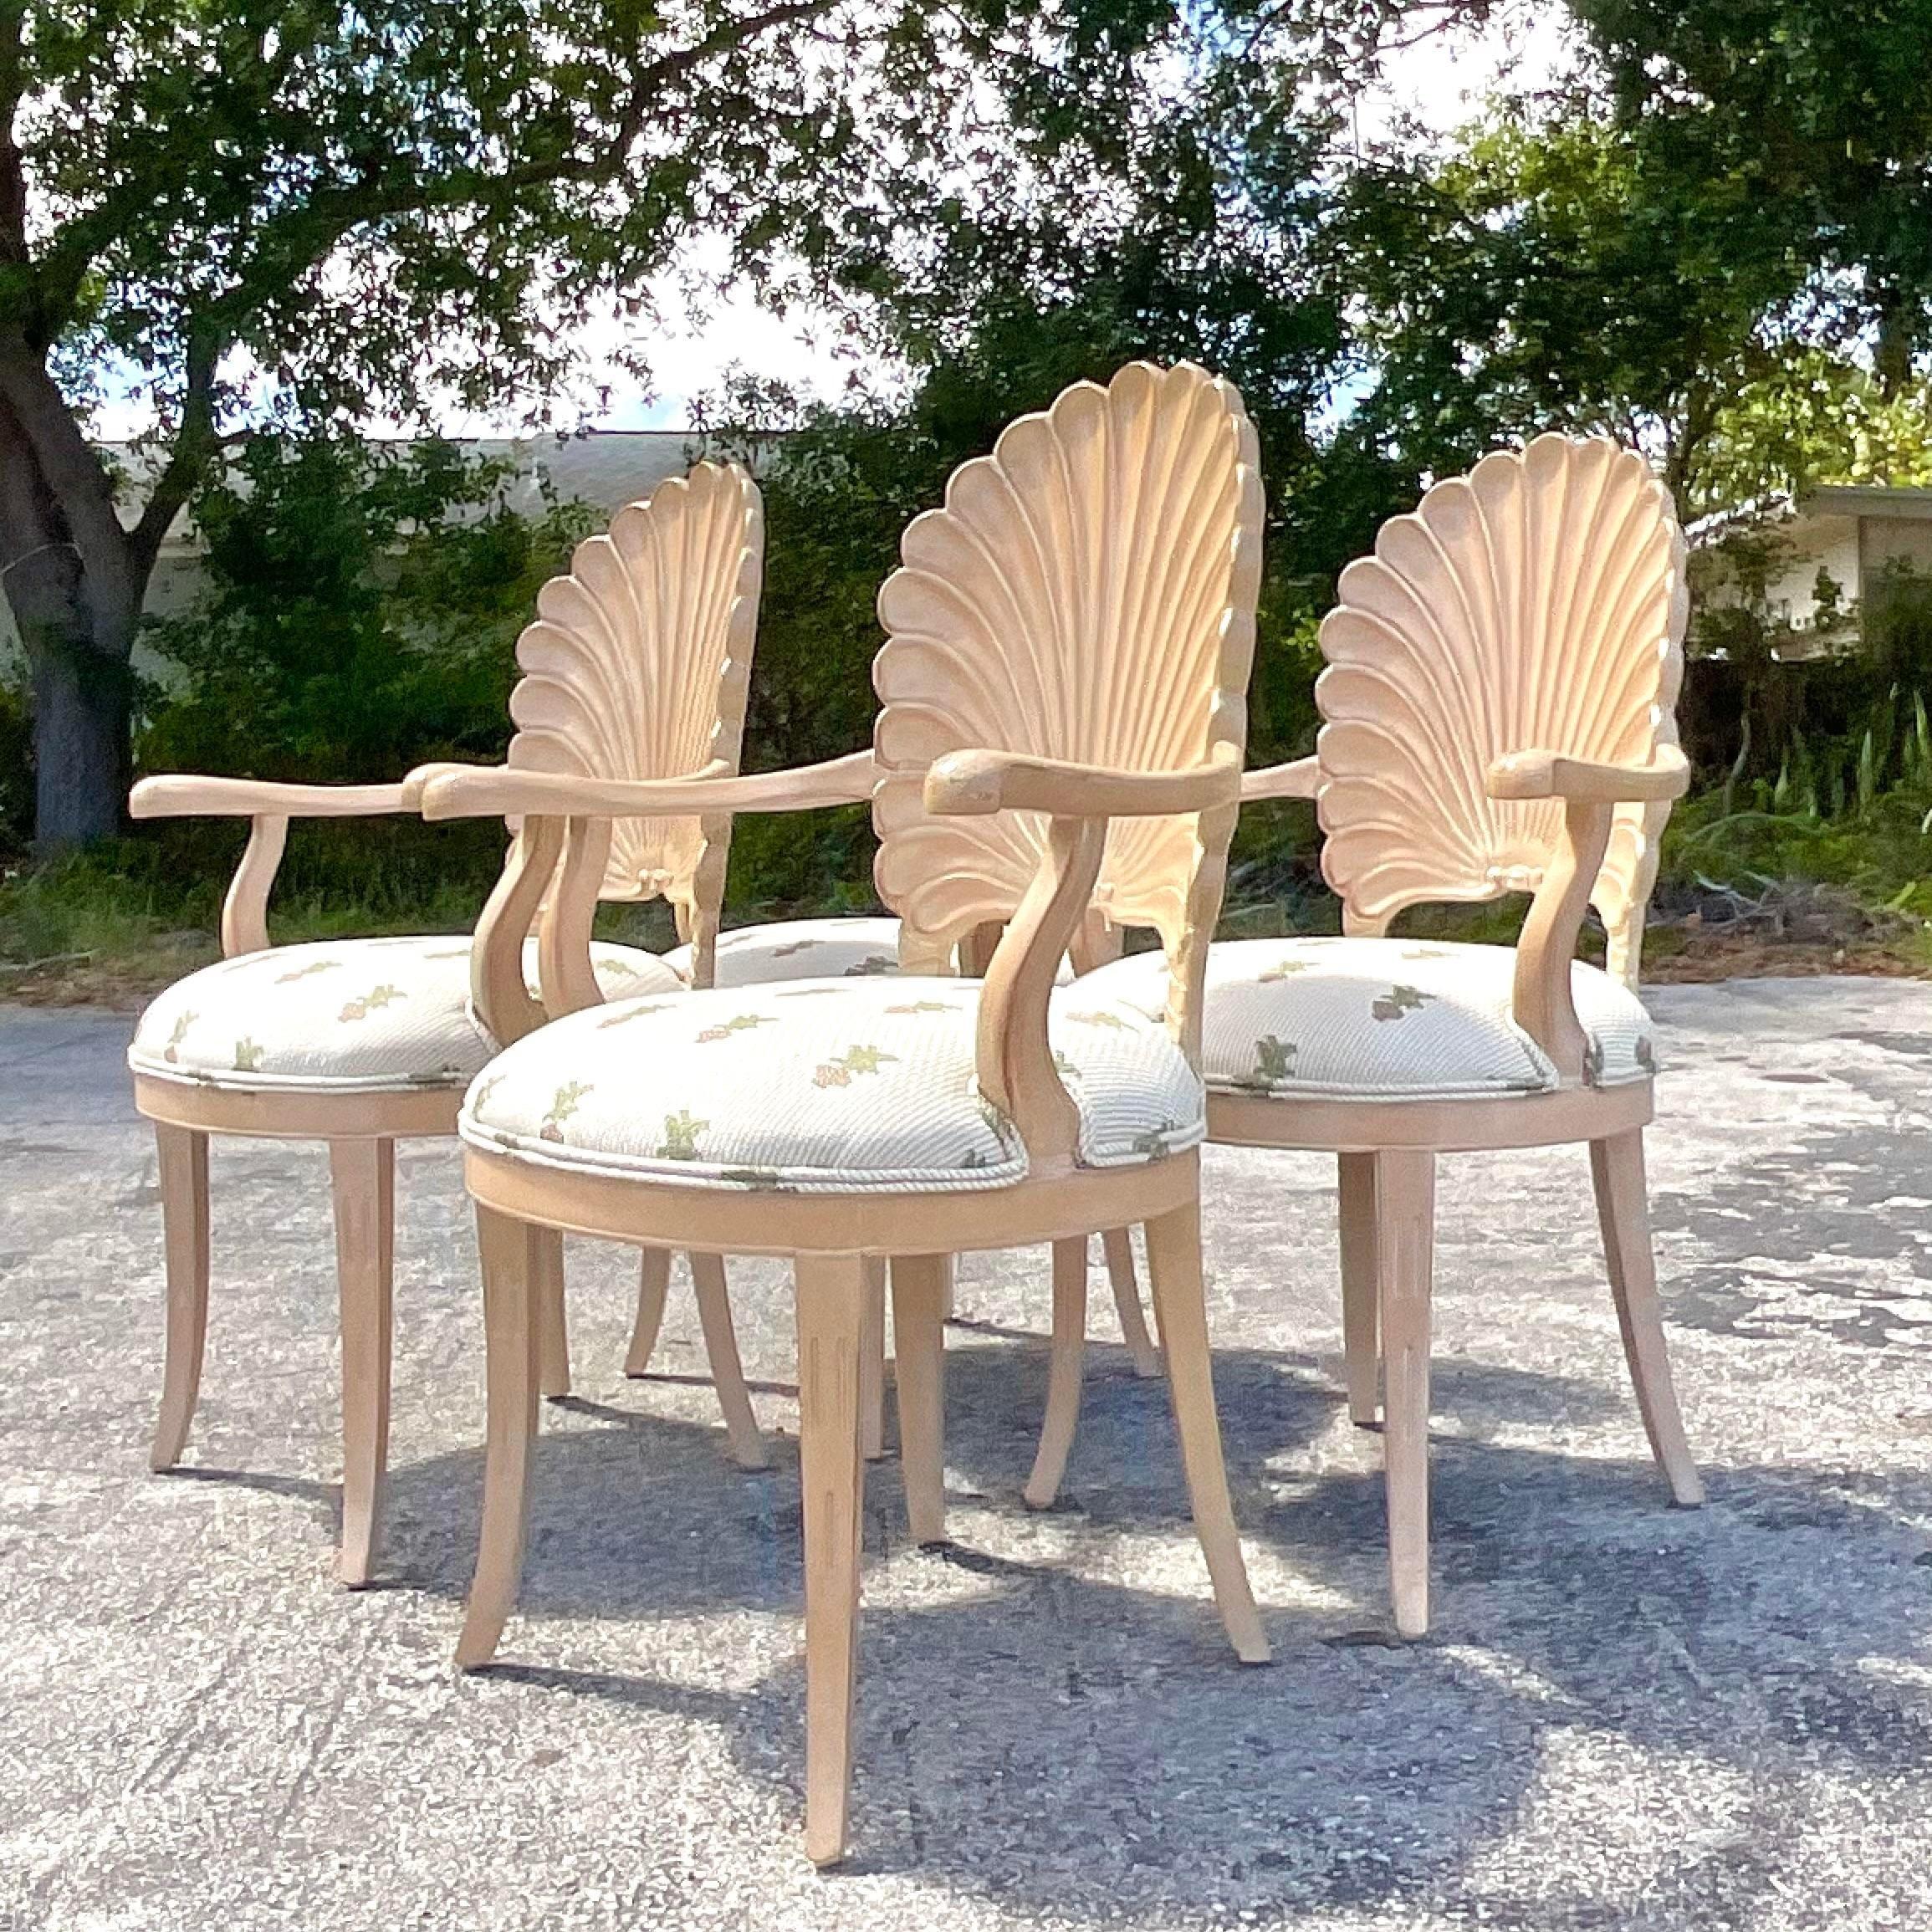 A fabulous set of vintage Coastal dining chairs. Four beautiful hand carved armchairs in a chic grotto design. Acquired from a Palm Beach estate.